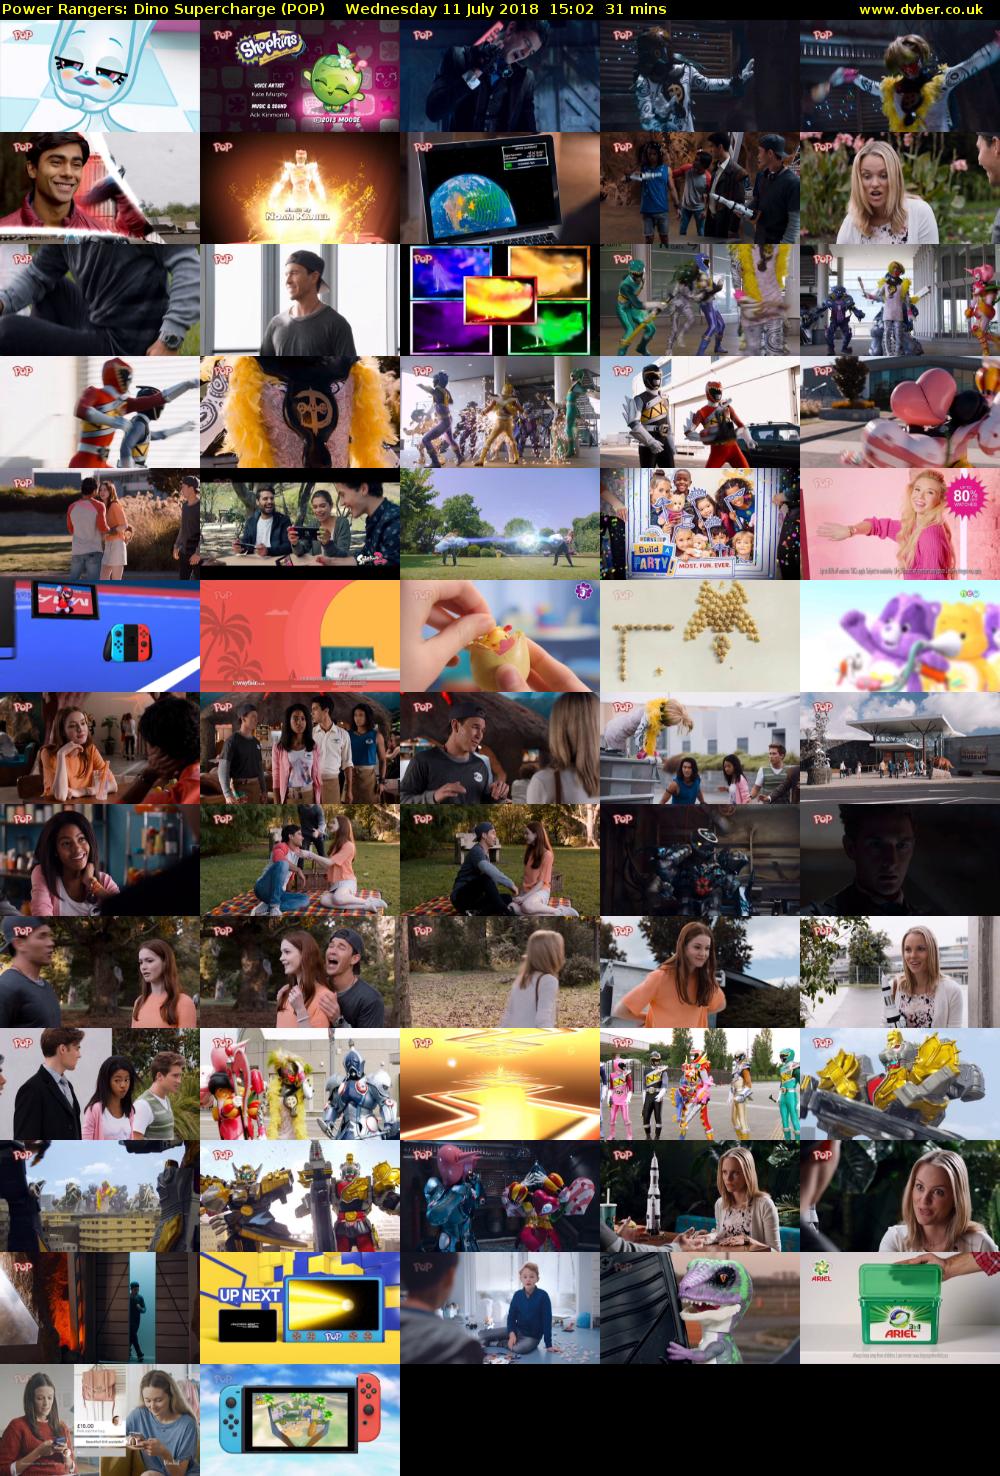 Power Rangers: Dino Supercharge (POP) Wednesday 11 July 2018 15:02 - 15:33